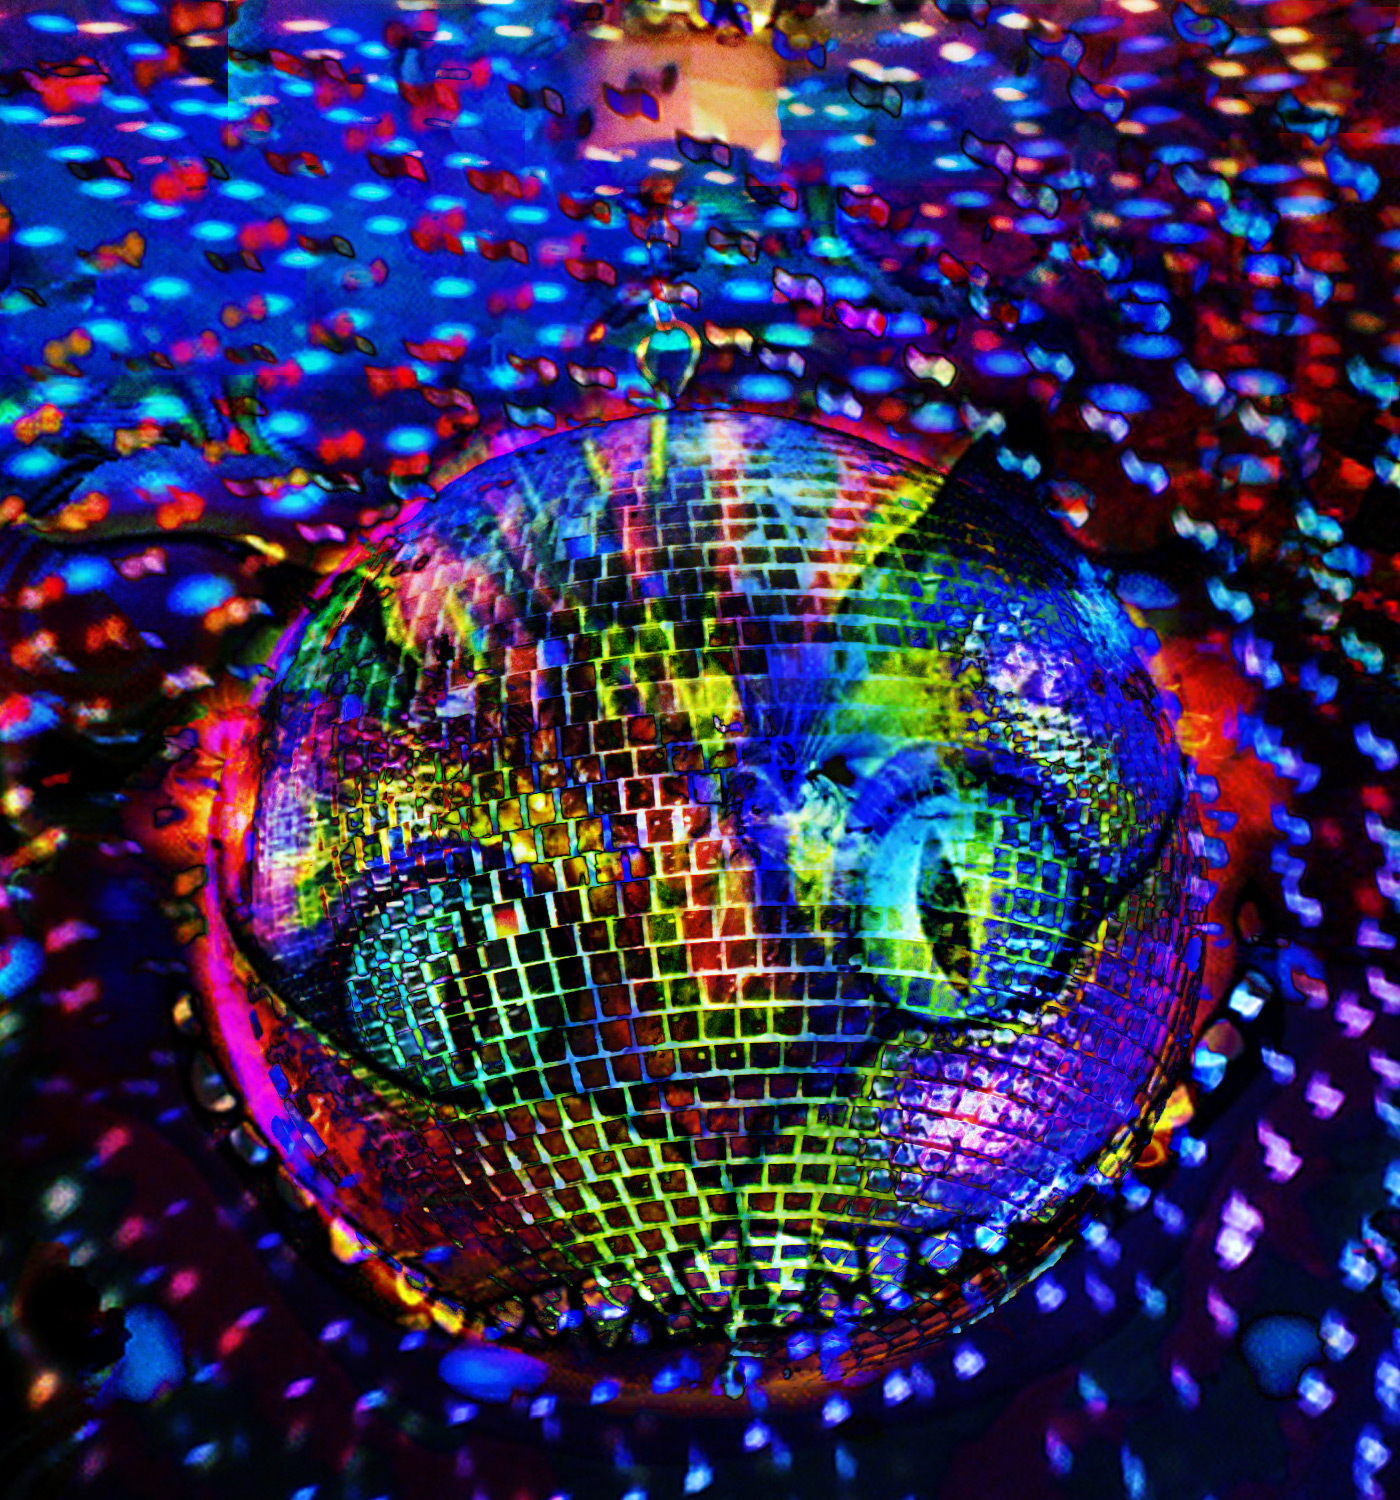 disco psycheness pt2 - Radio Clash Podcast Midnight Stud - Gloria (fingertrouble remix) Radio Clash Music Mashup Podcast brings you the best in eclectic tunes, mashups and remixes from around the world. Since 2004, we've been bringing you the freshest and most innovative music from a diverse range of genres and cultures. Join us on our musical journey as we explore the sounds of yesterday, today, and tomorrow. Discover new music and be inspired by the mashup of musical styles that only Radio Clash can provide. Subscribe now to elevate your musical experience!